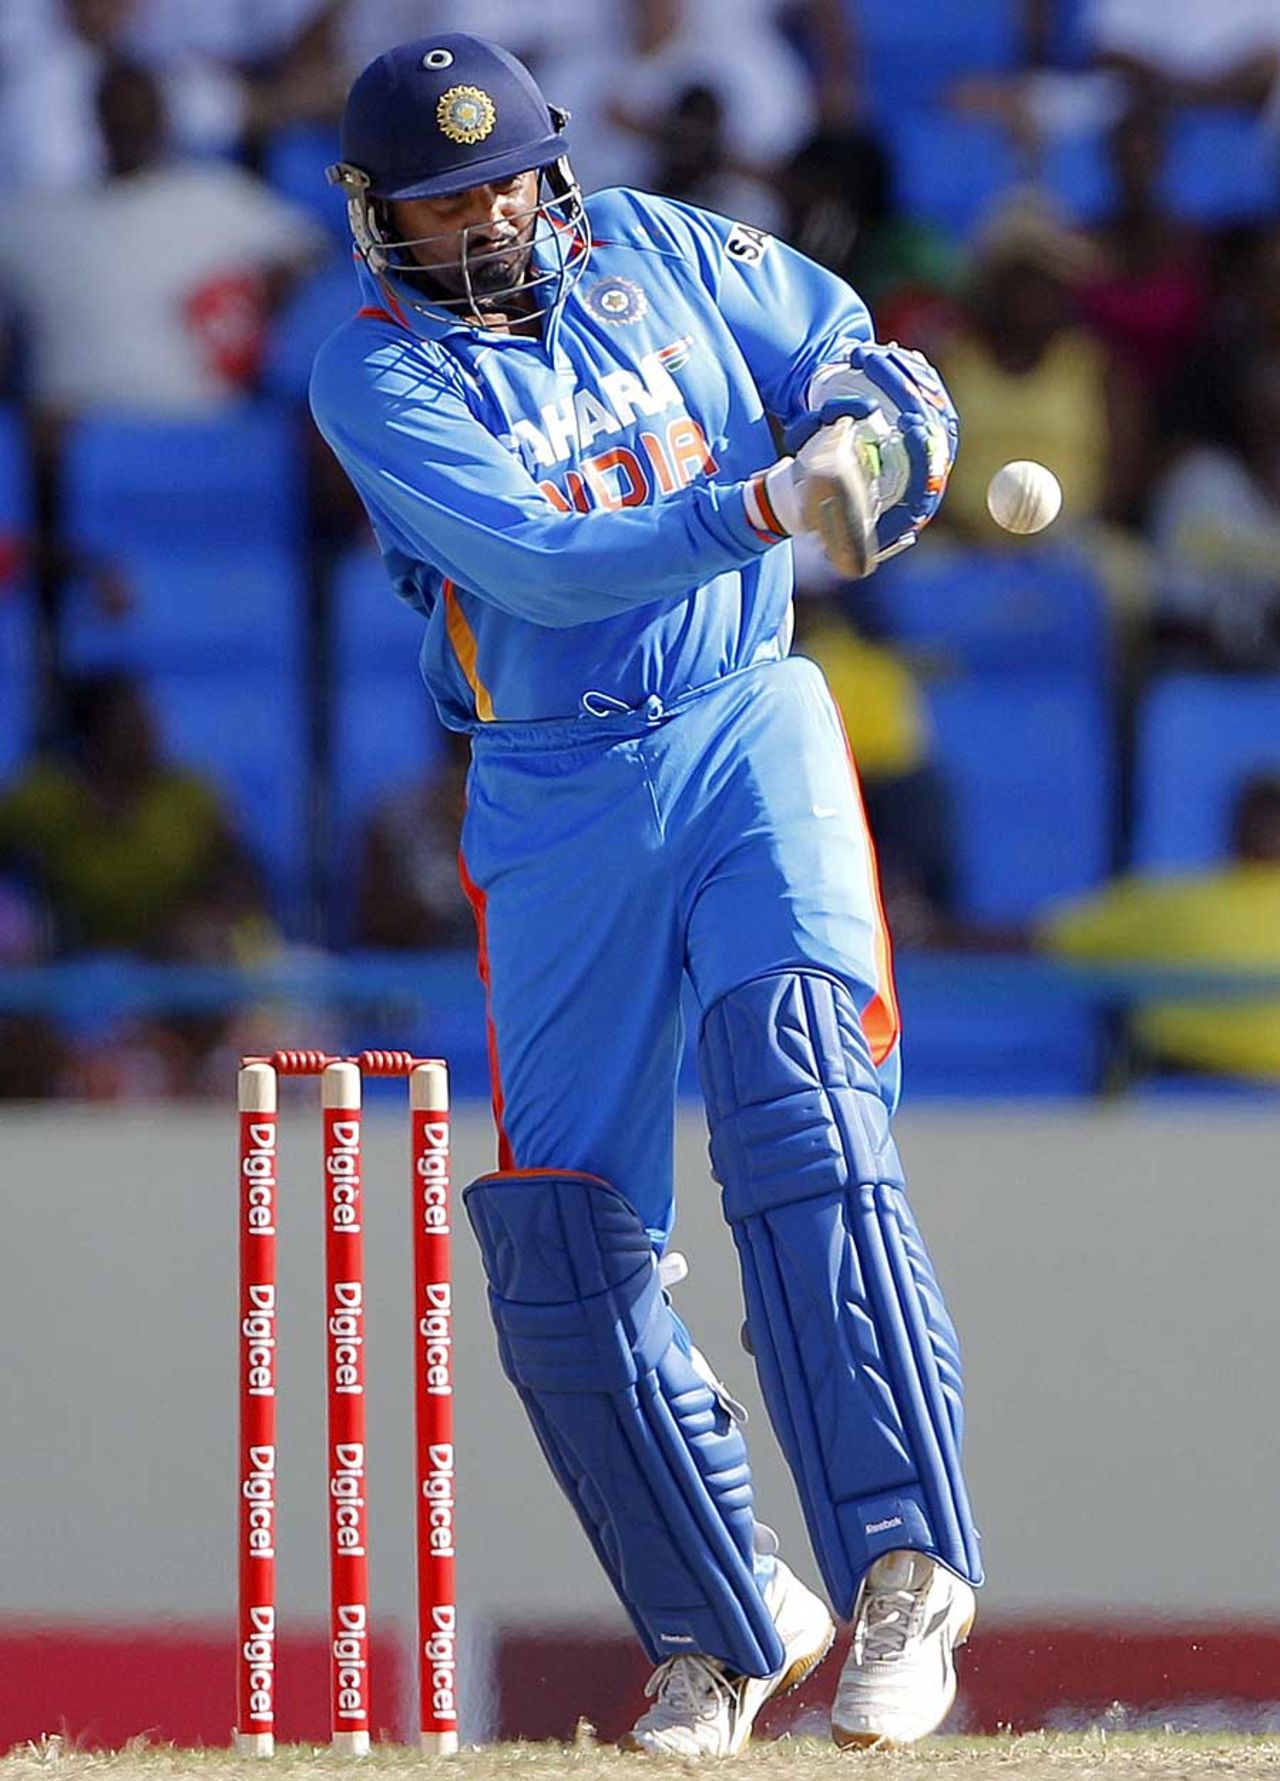 Harbhajan Singh provided excellent support to Rohit Sharma, West Indies v India, 3rd ODI, Antigua, June 11, 2011